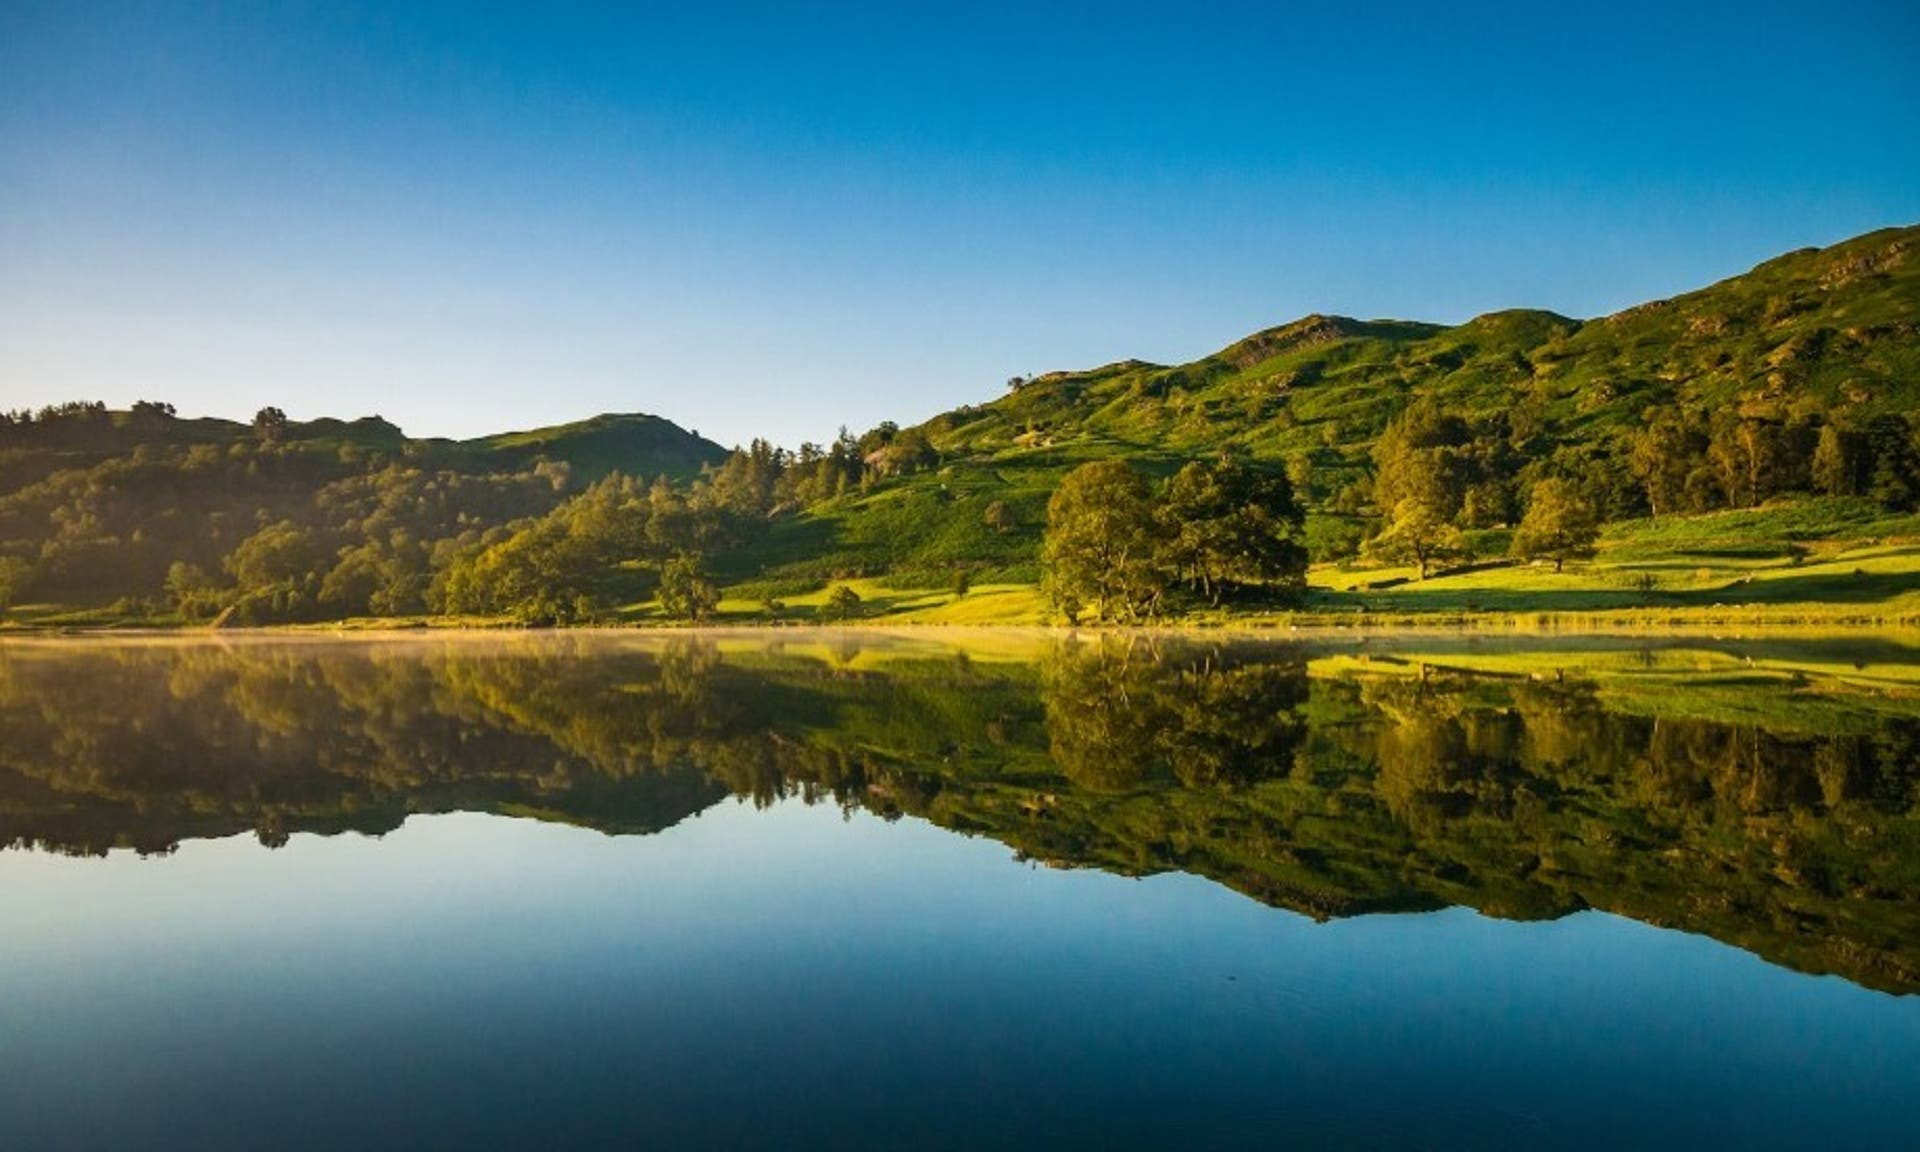  picturesque image of a lake in the Lake District, surrounded by green grass and trees on a sunny day 